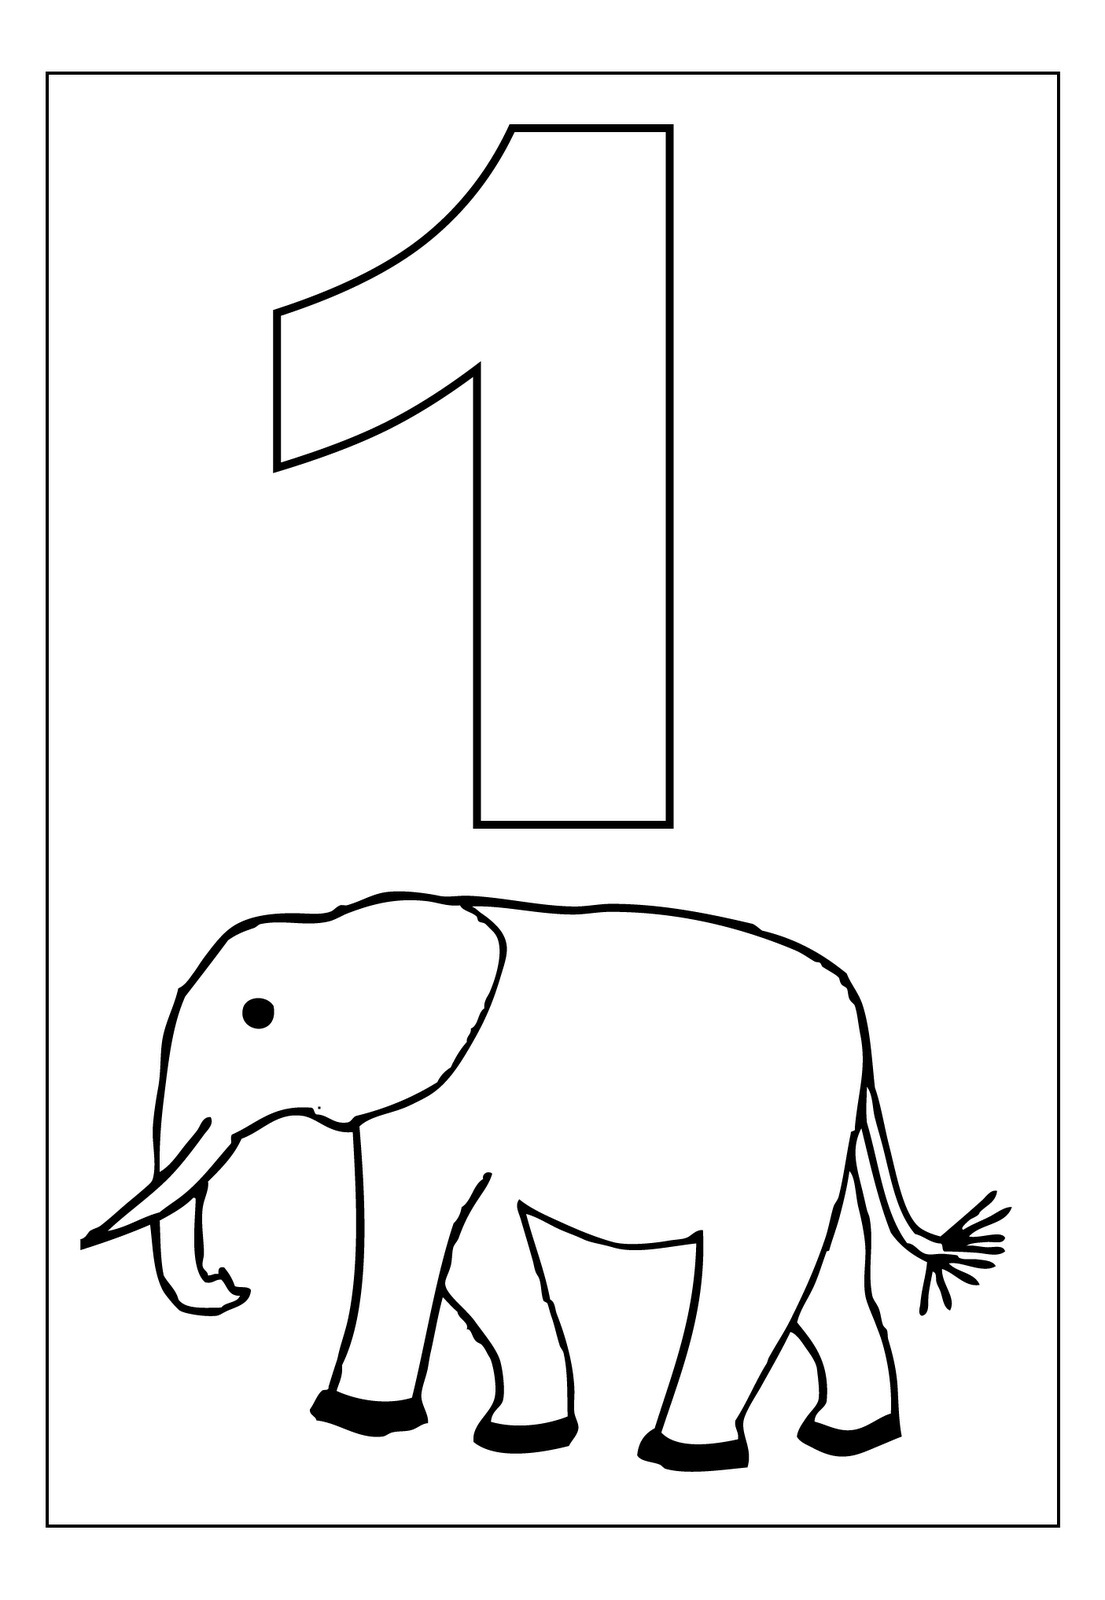 Free-Printable-Number-Coloring-Pages-For-Kids